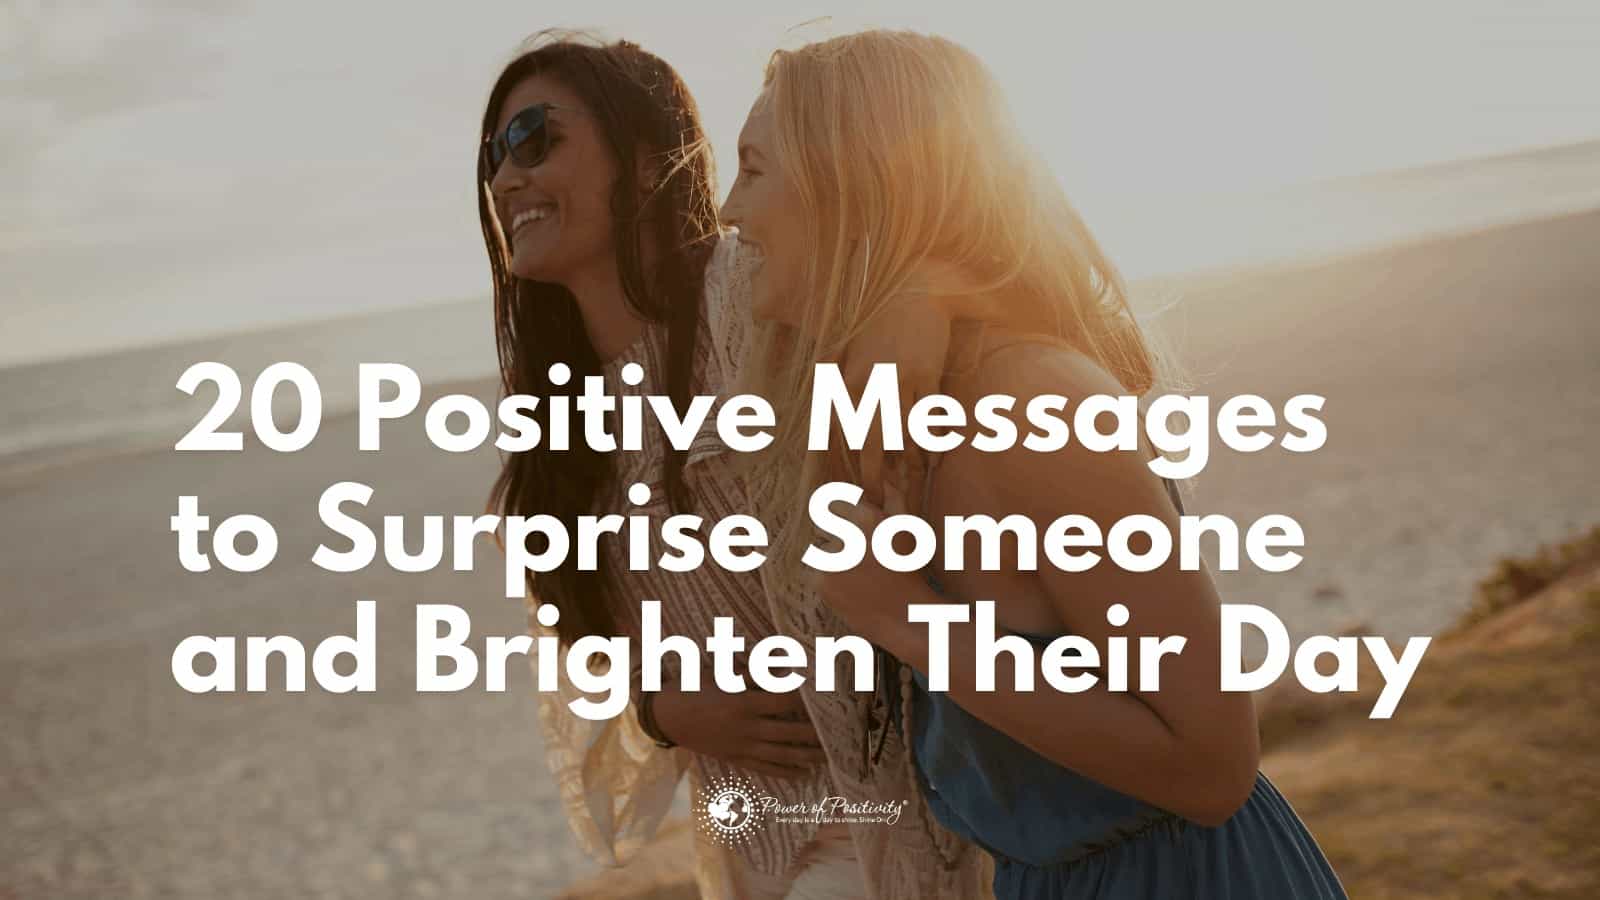 20 Positive Messages to Surprise Someone and Brighten Their Day